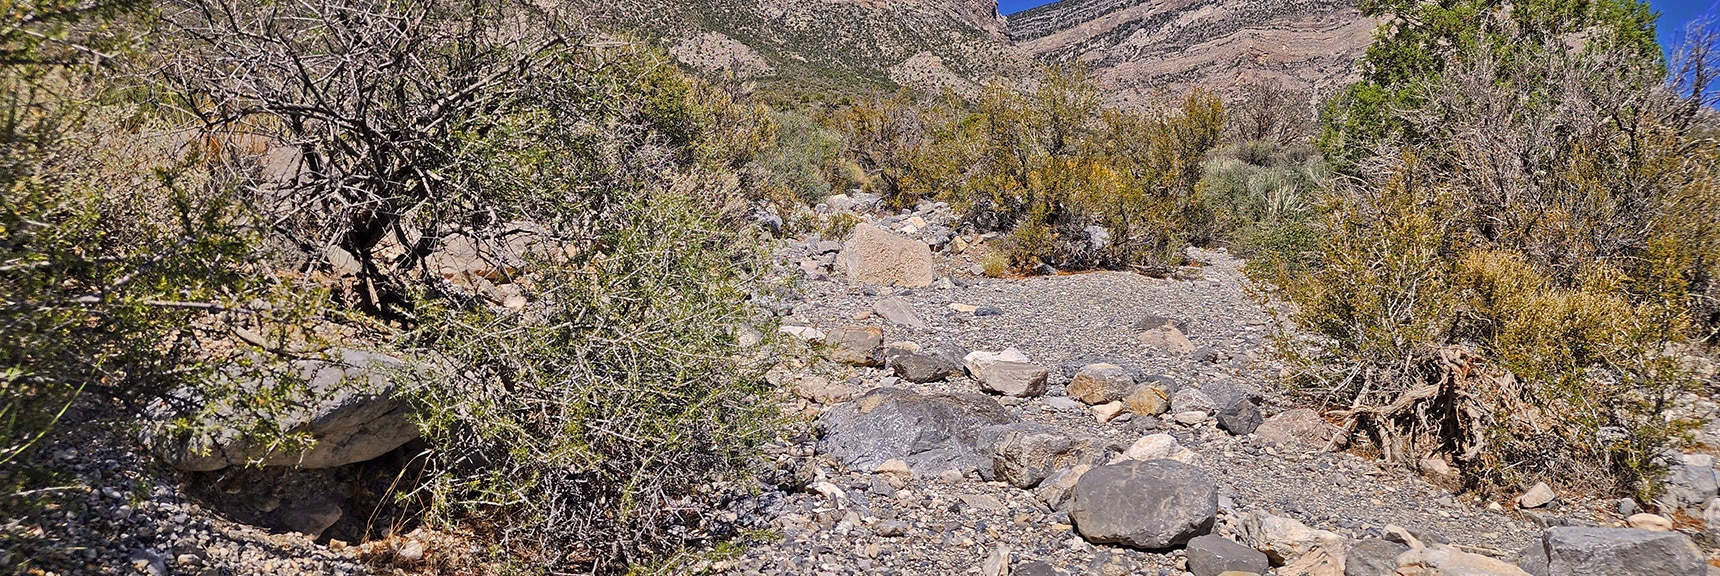 Where Trail Crosses the Wash, Take a Left to the Trailhead | Kyle Canyon Grand Crossing | Southern Half | Red Rock Canyon National Conservation Area, Nevada